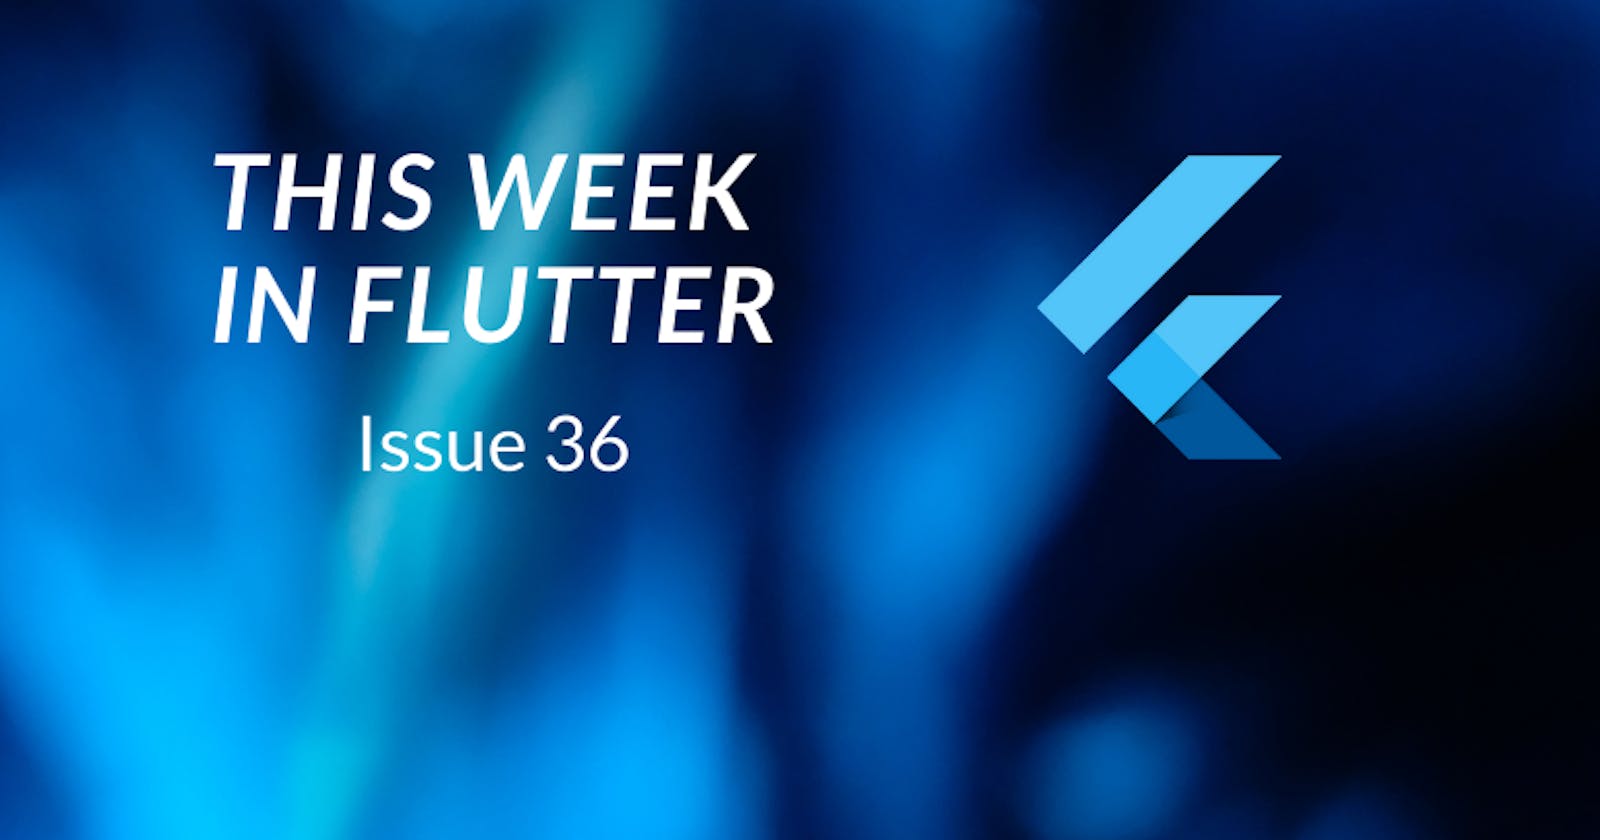 This week in Flutter #36